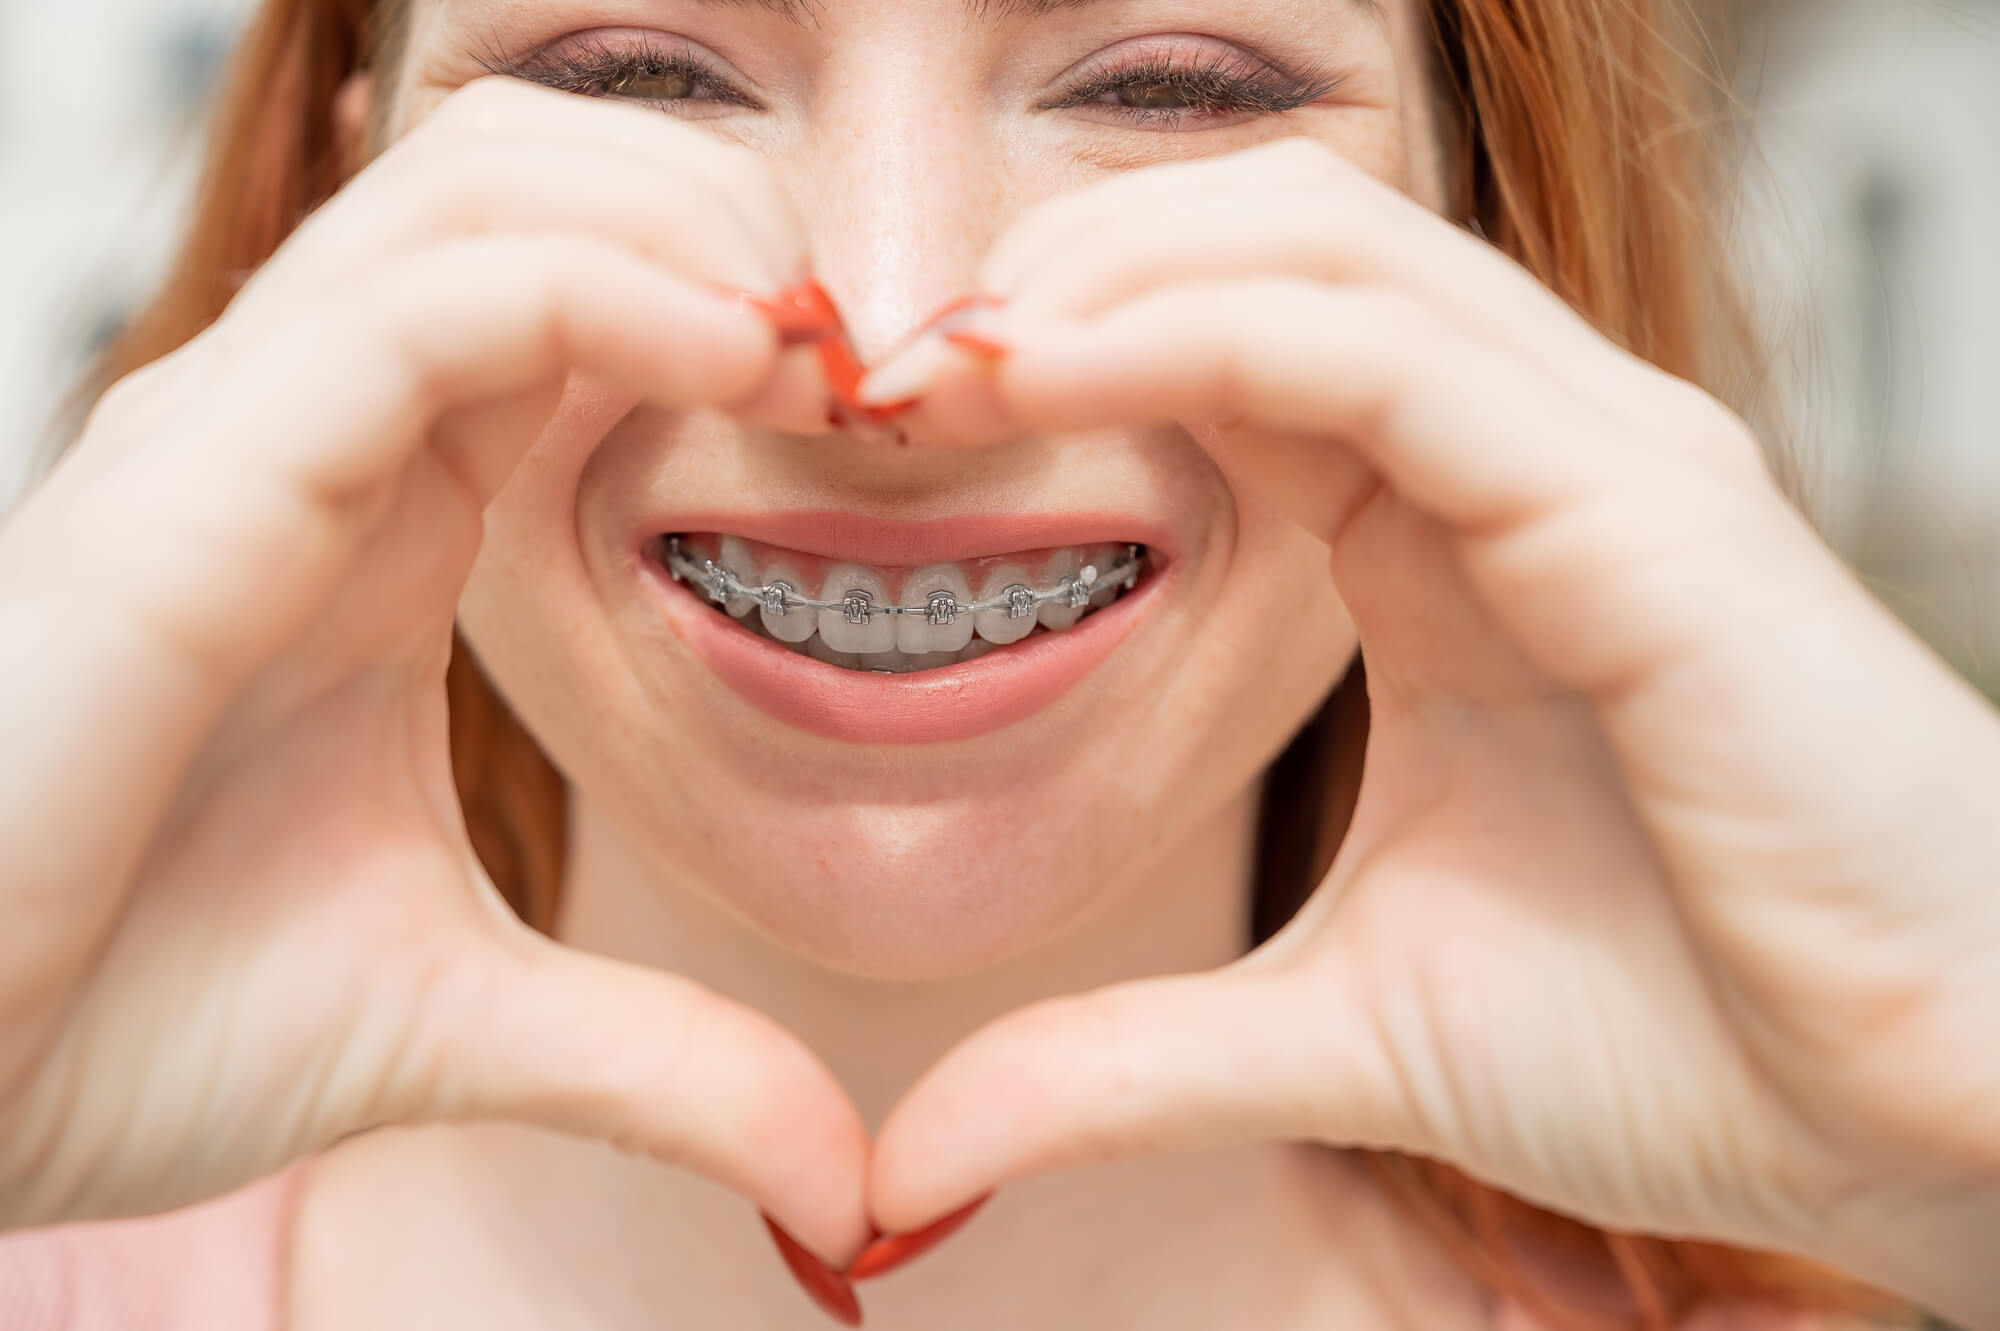 red haired woman smiling with braces making heart shape